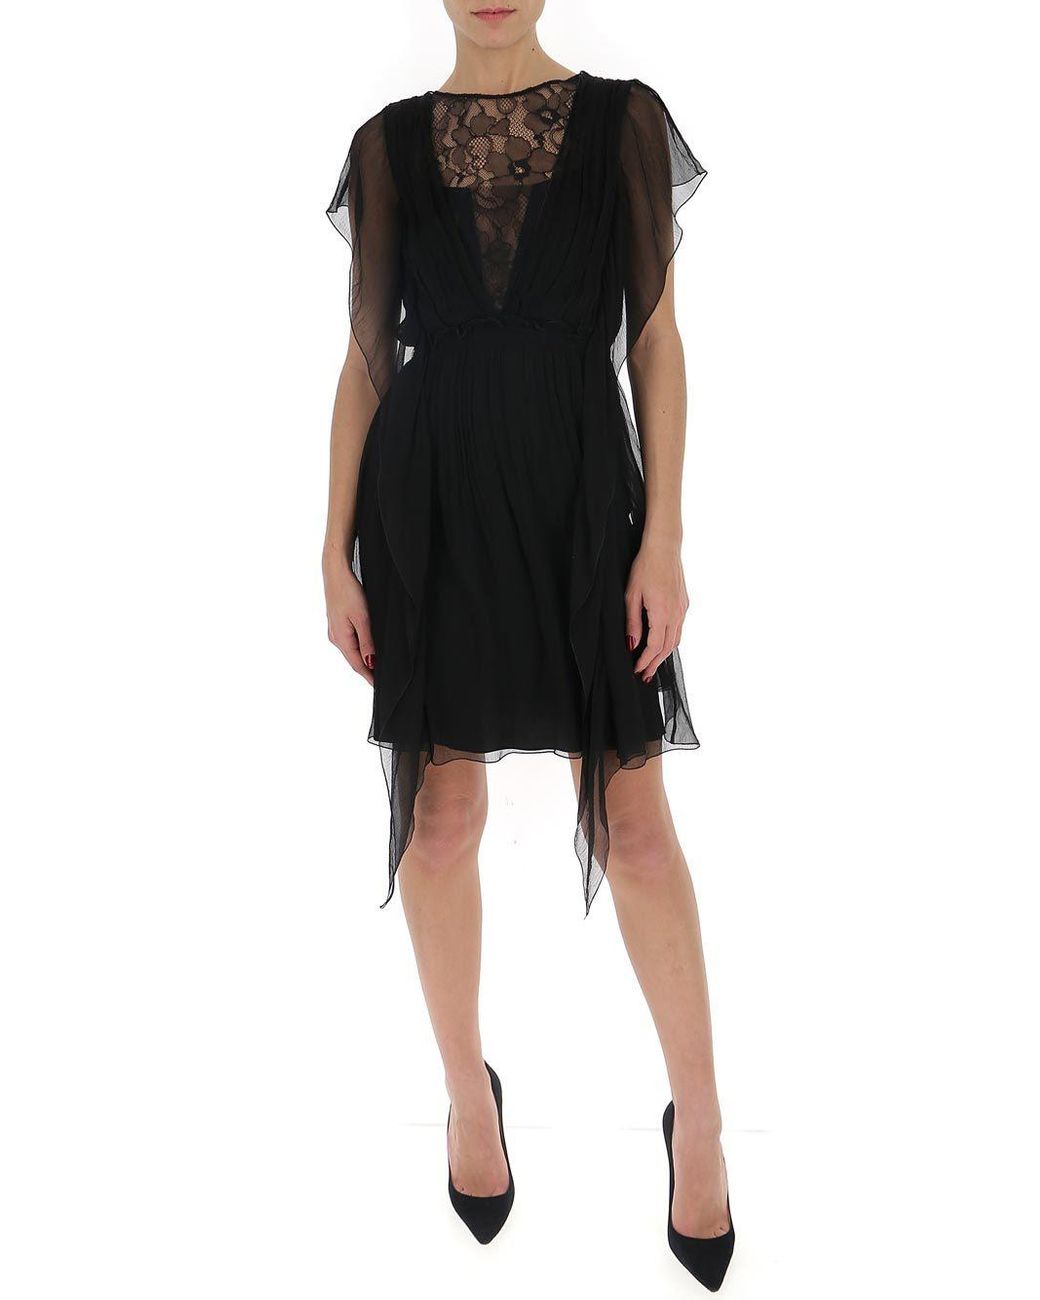 Alberta Ferretti Dress With Lace Details in Brown - Lyst